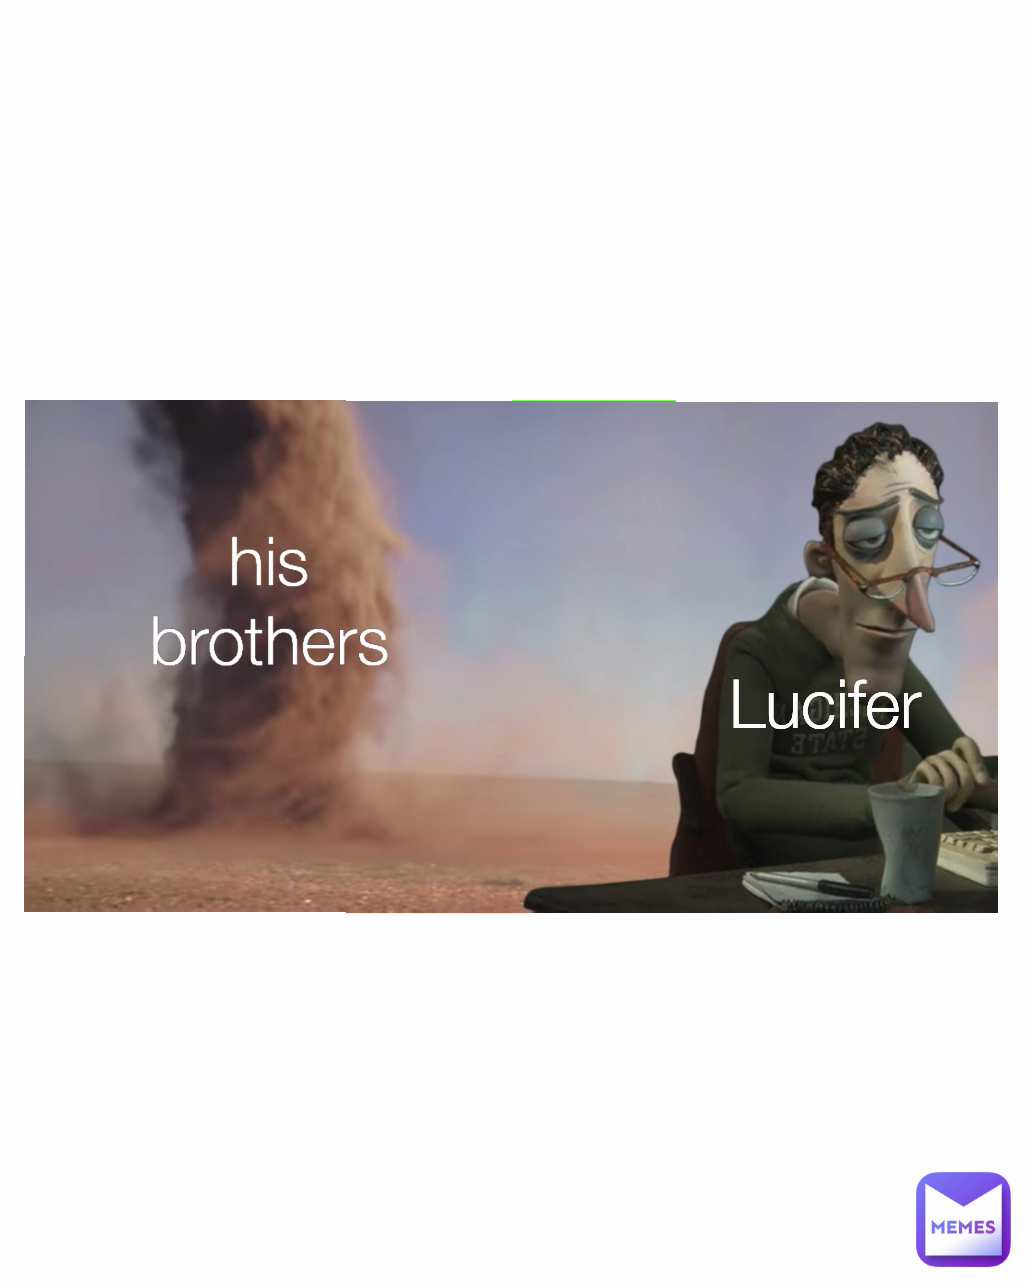 Lucifer his brothers